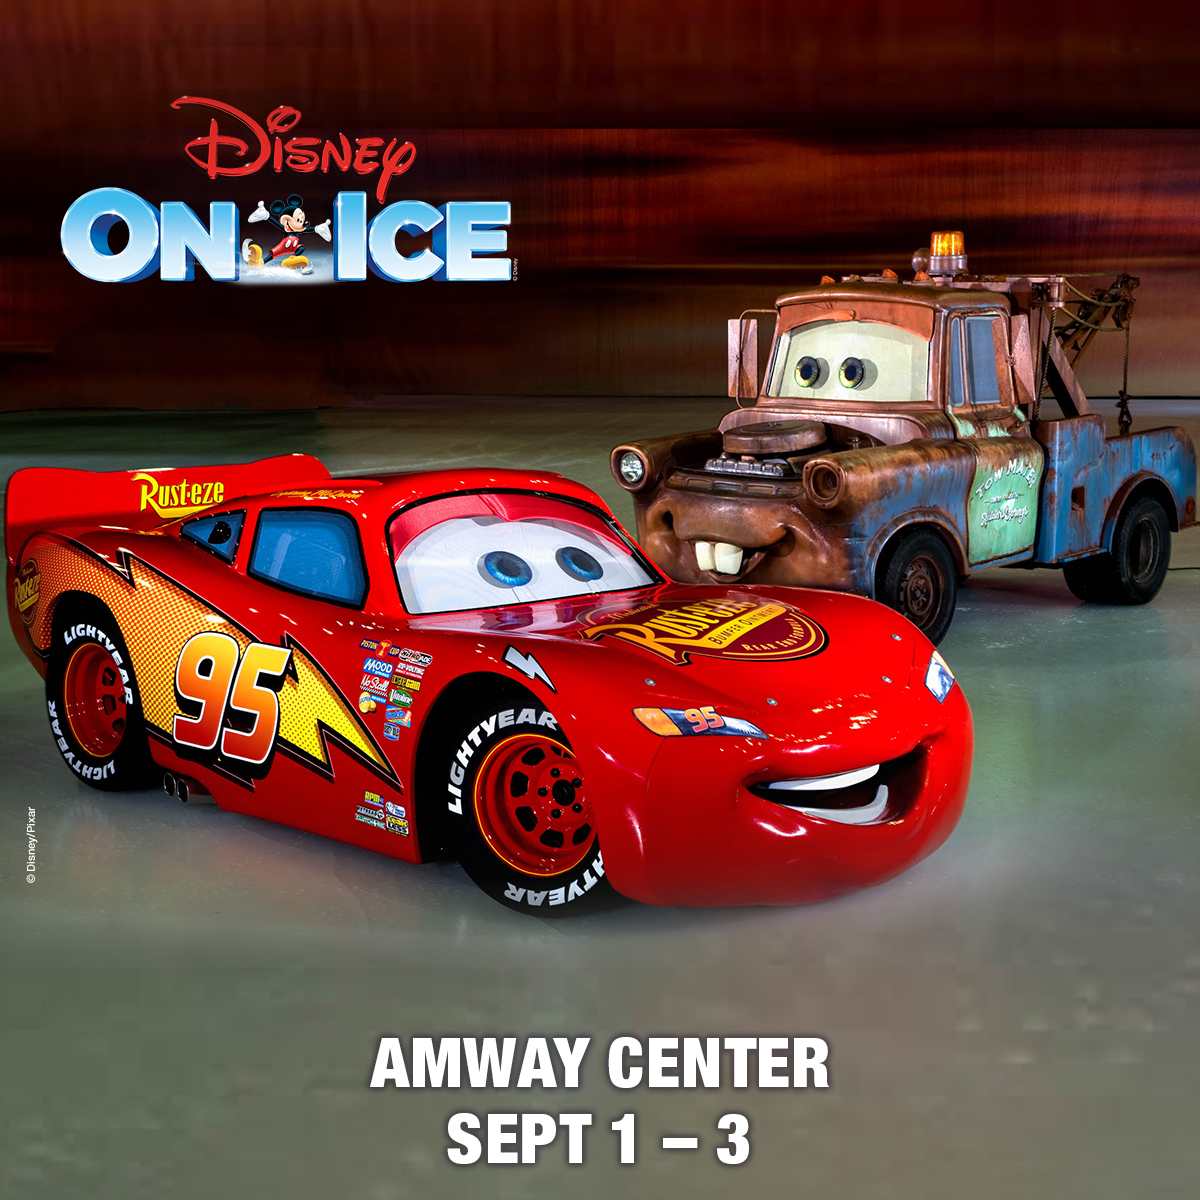 Disney On Ice Presents Magic in the Stars at the Amway Center